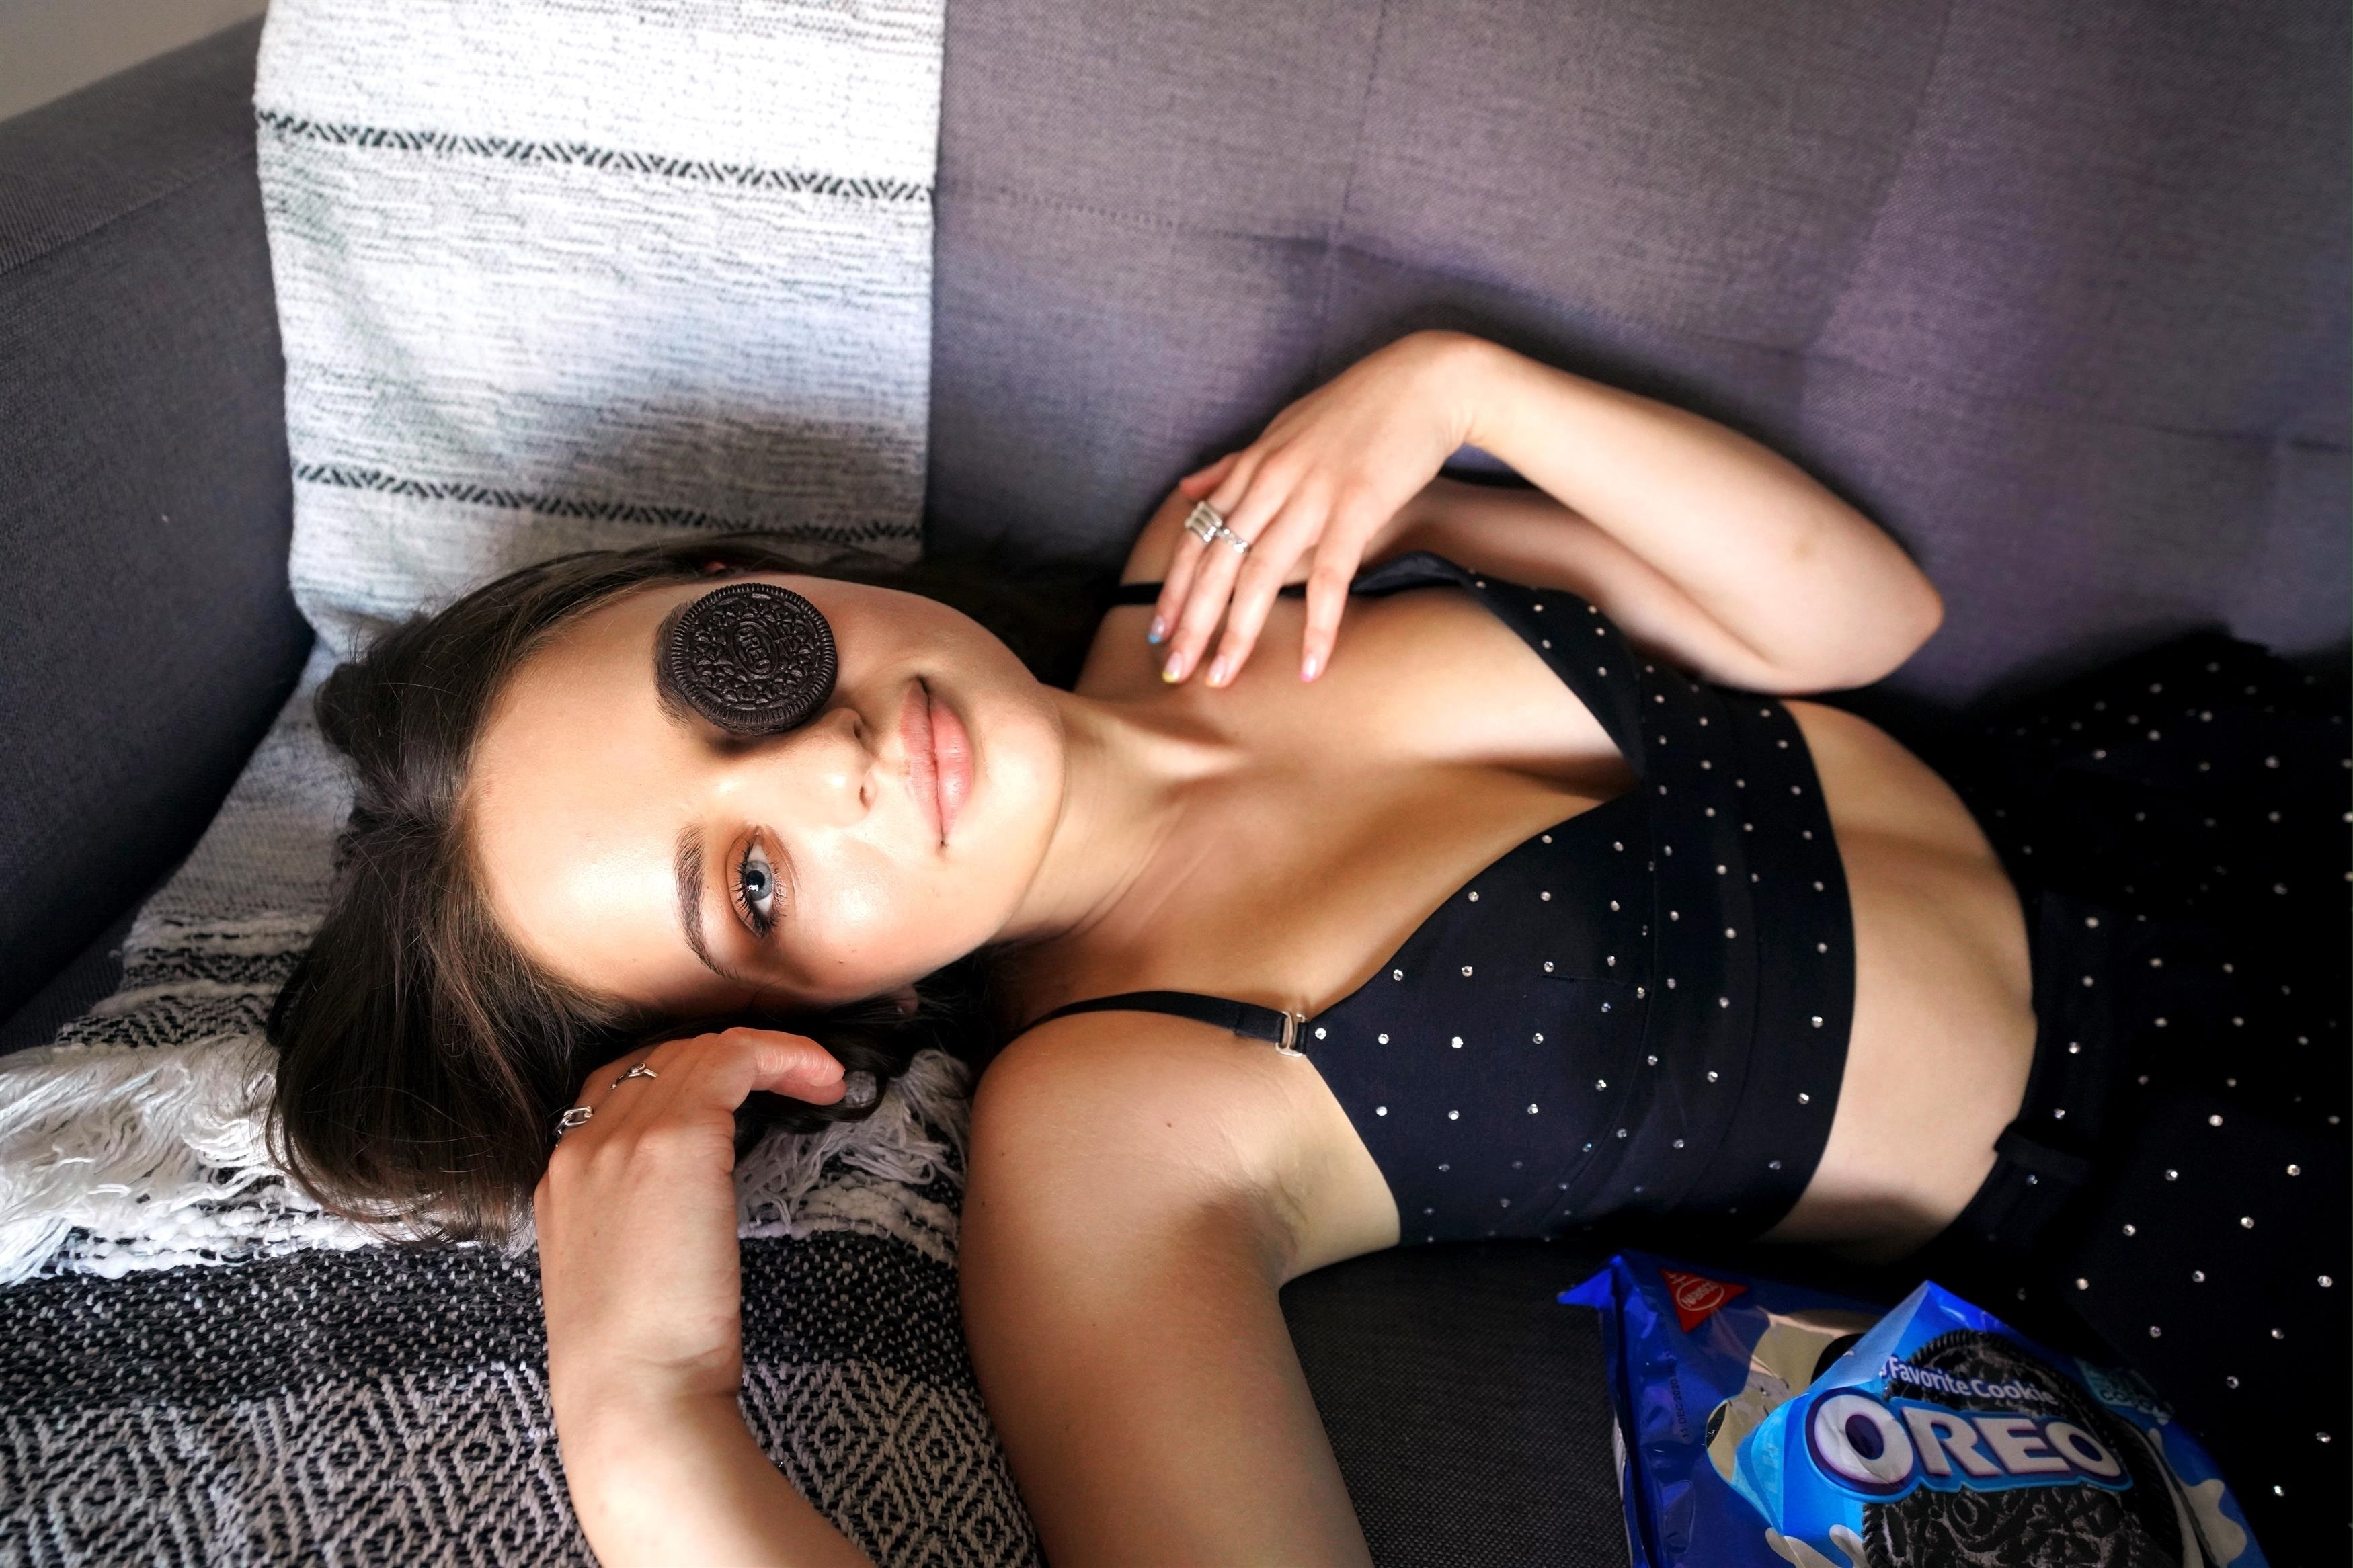 Joey King is Getting Sensual With an Oreo! - Photo 10